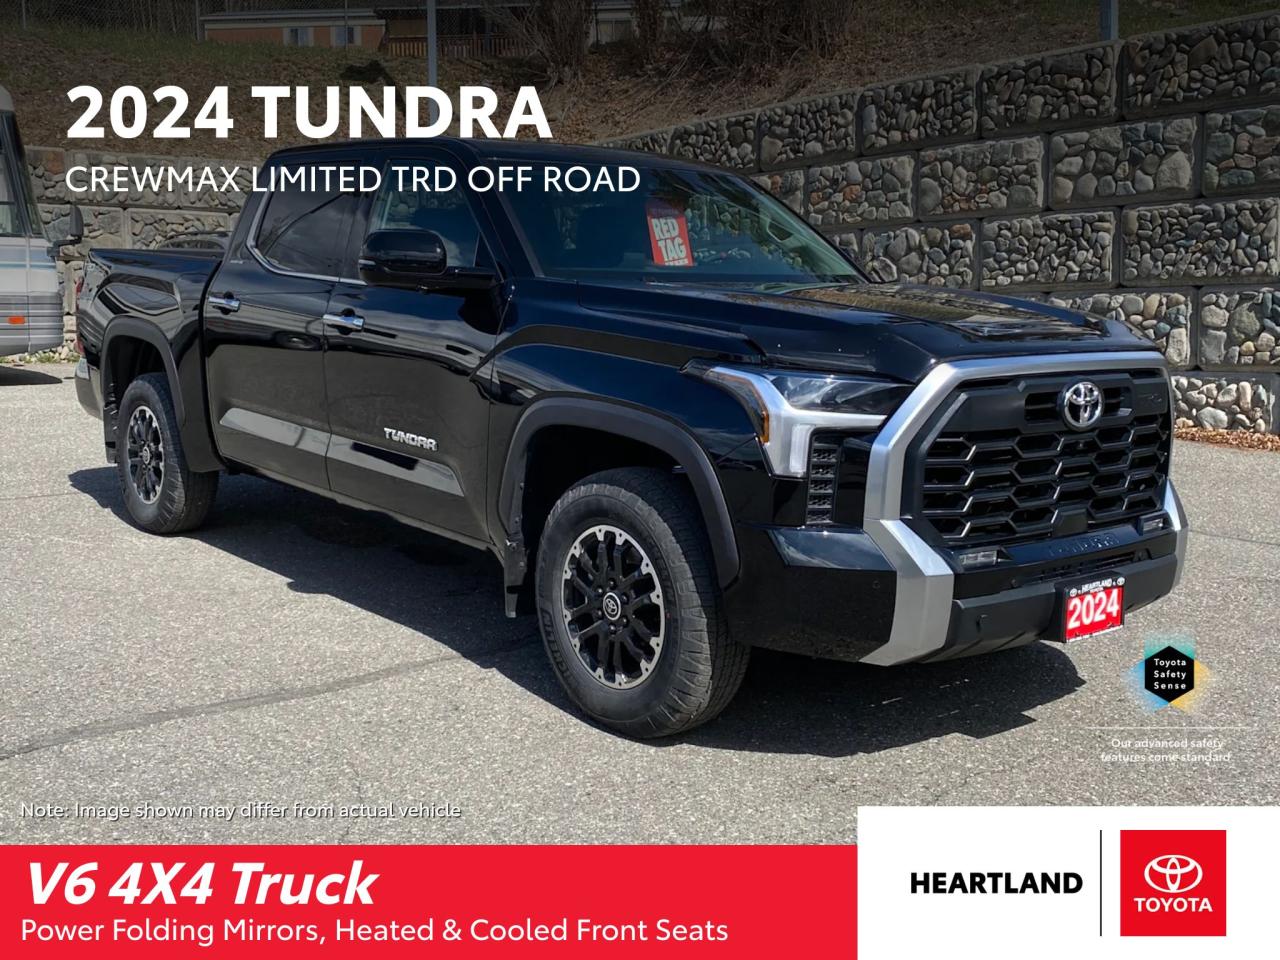 2024 Toyota Tundra Crewmax Limited TRD Off Road Photo0